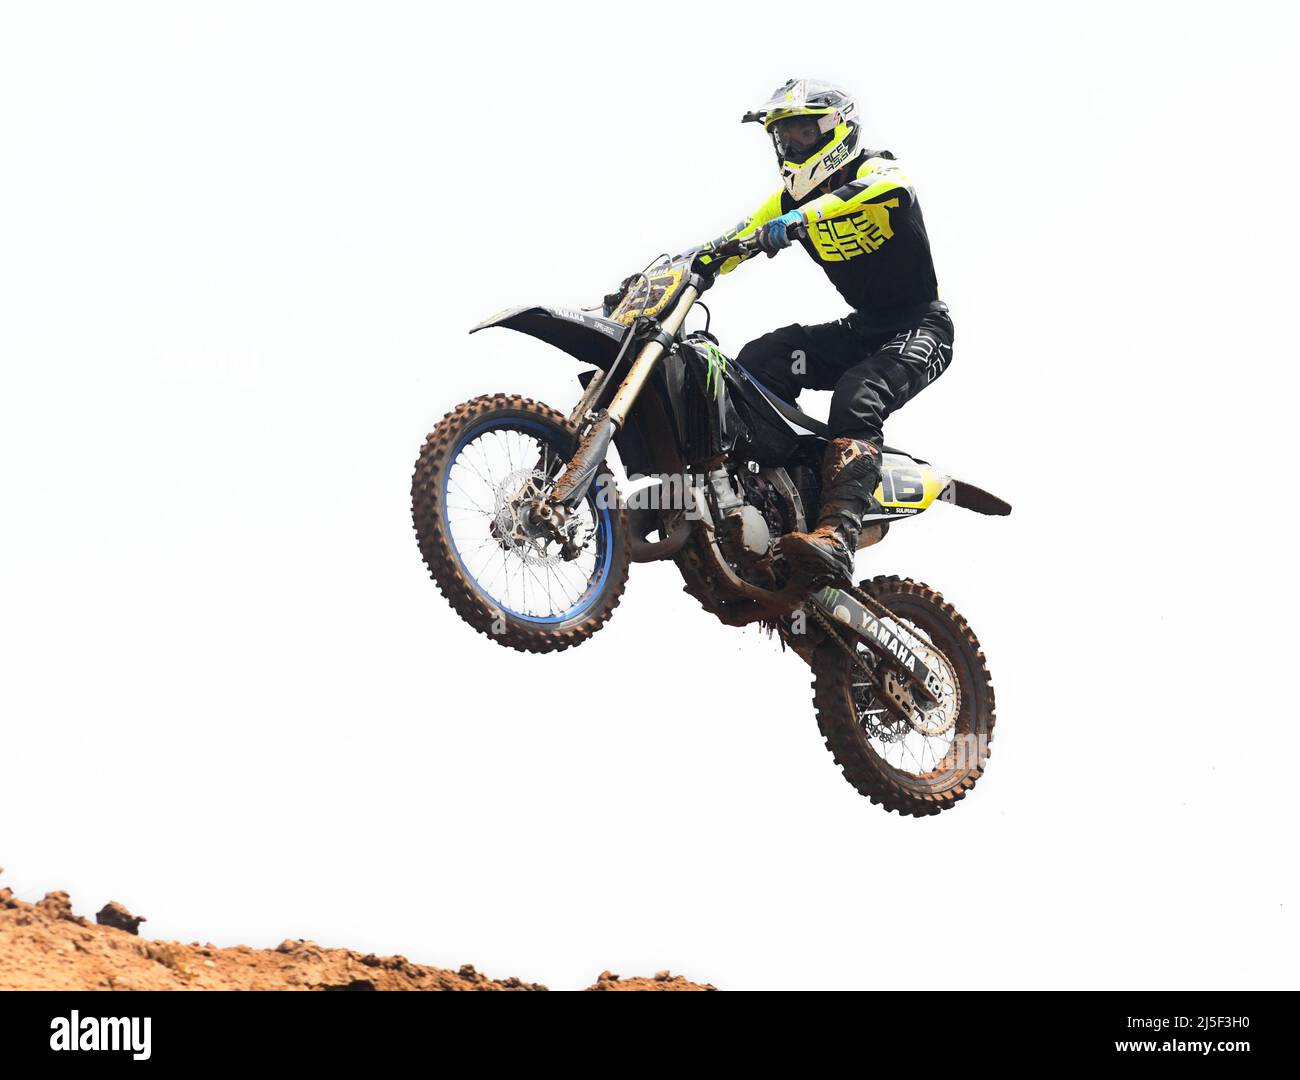 Motorcycle race - Jump, extreme sport Stock Photo